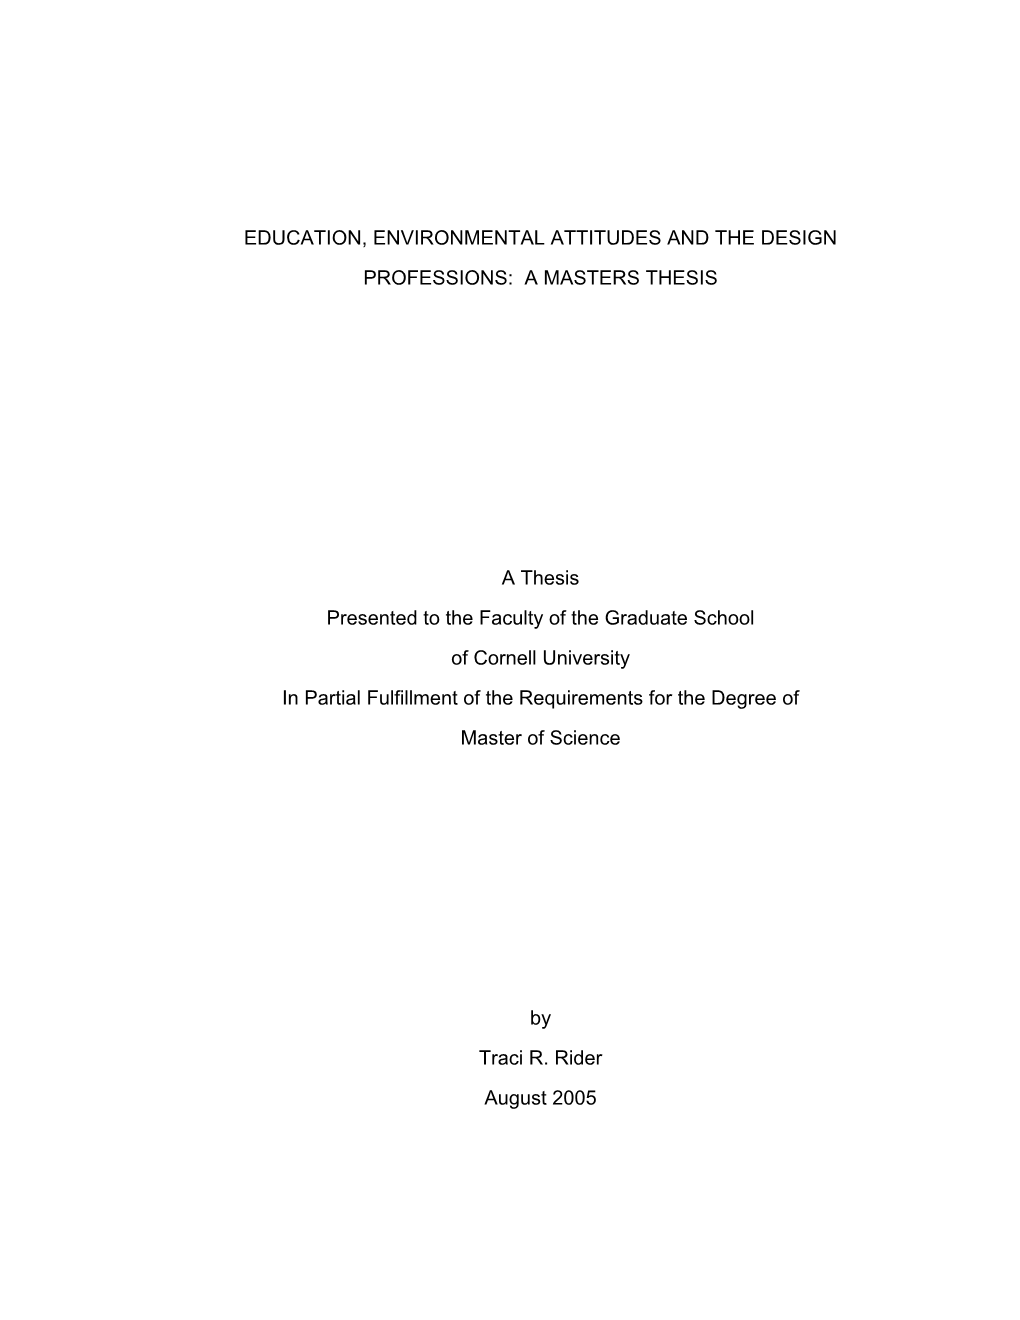 Education, Environmental Attitudes and the Design Professions: a Masters Thesis